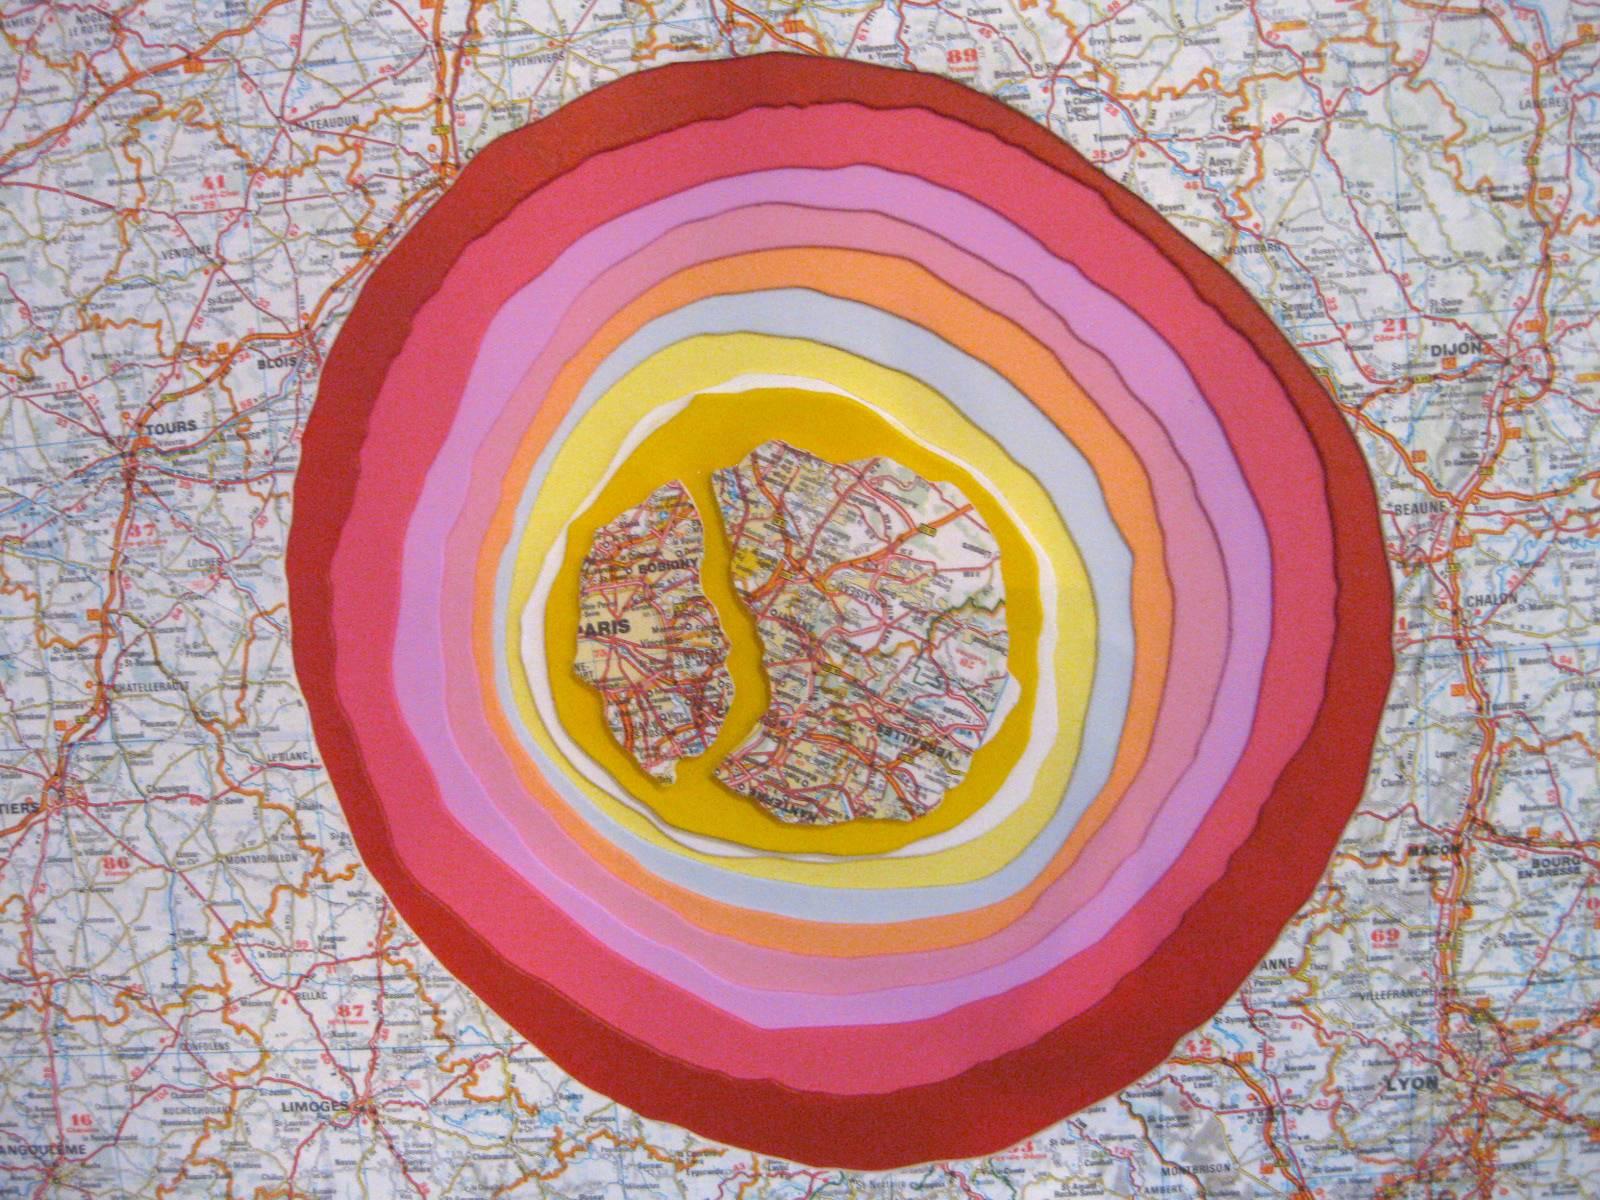 This mixed-media painting is composed of layers of receding painted card-stock producing an image in relief. The technique gives the piece a topographical, geological or planetary effect. The warm red, yellow and pinks stand in contrast to the